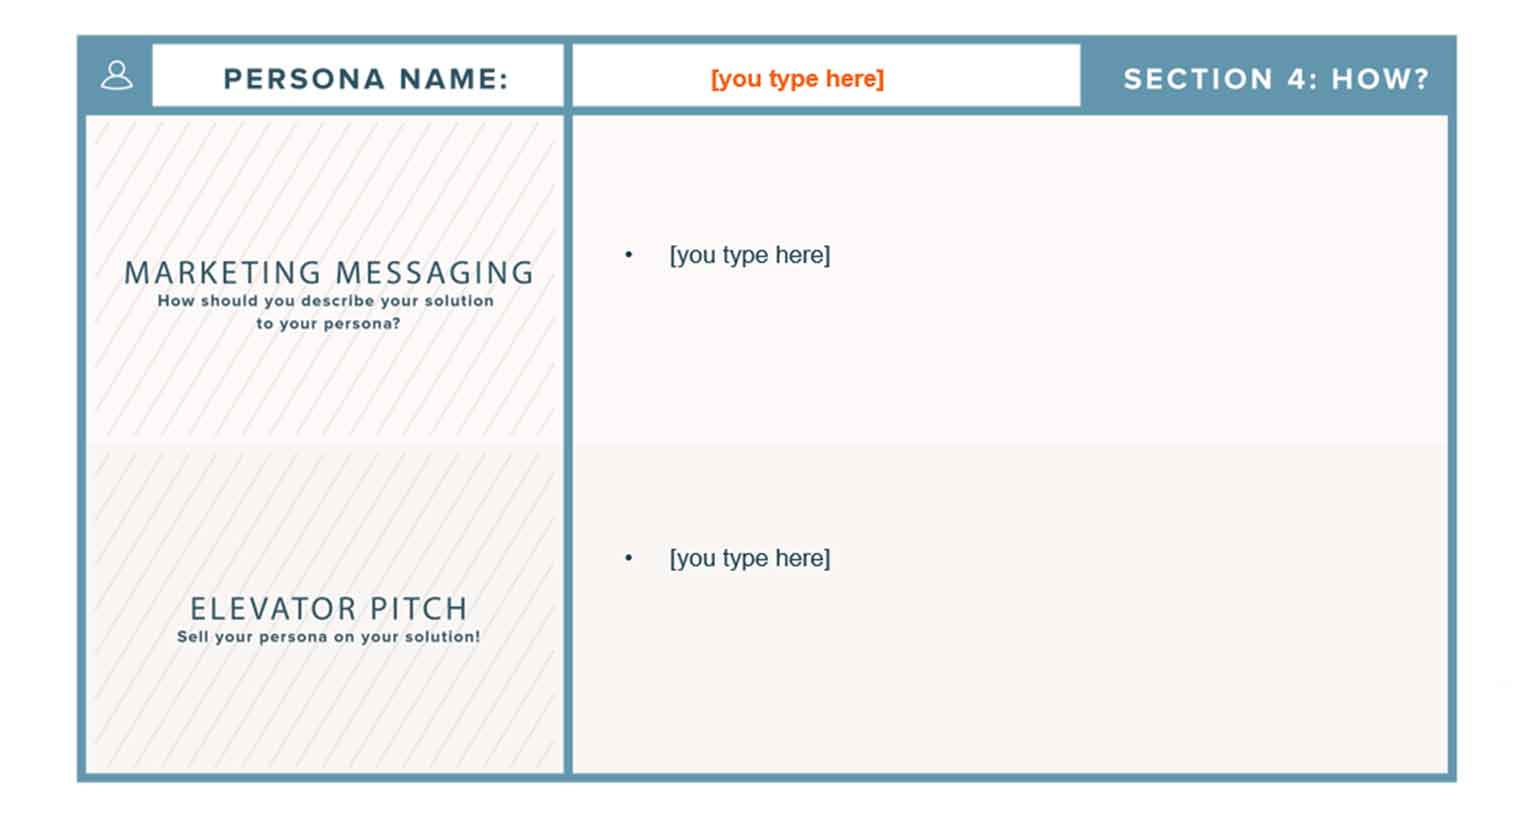 Section 4 of a free template from HubSpot.